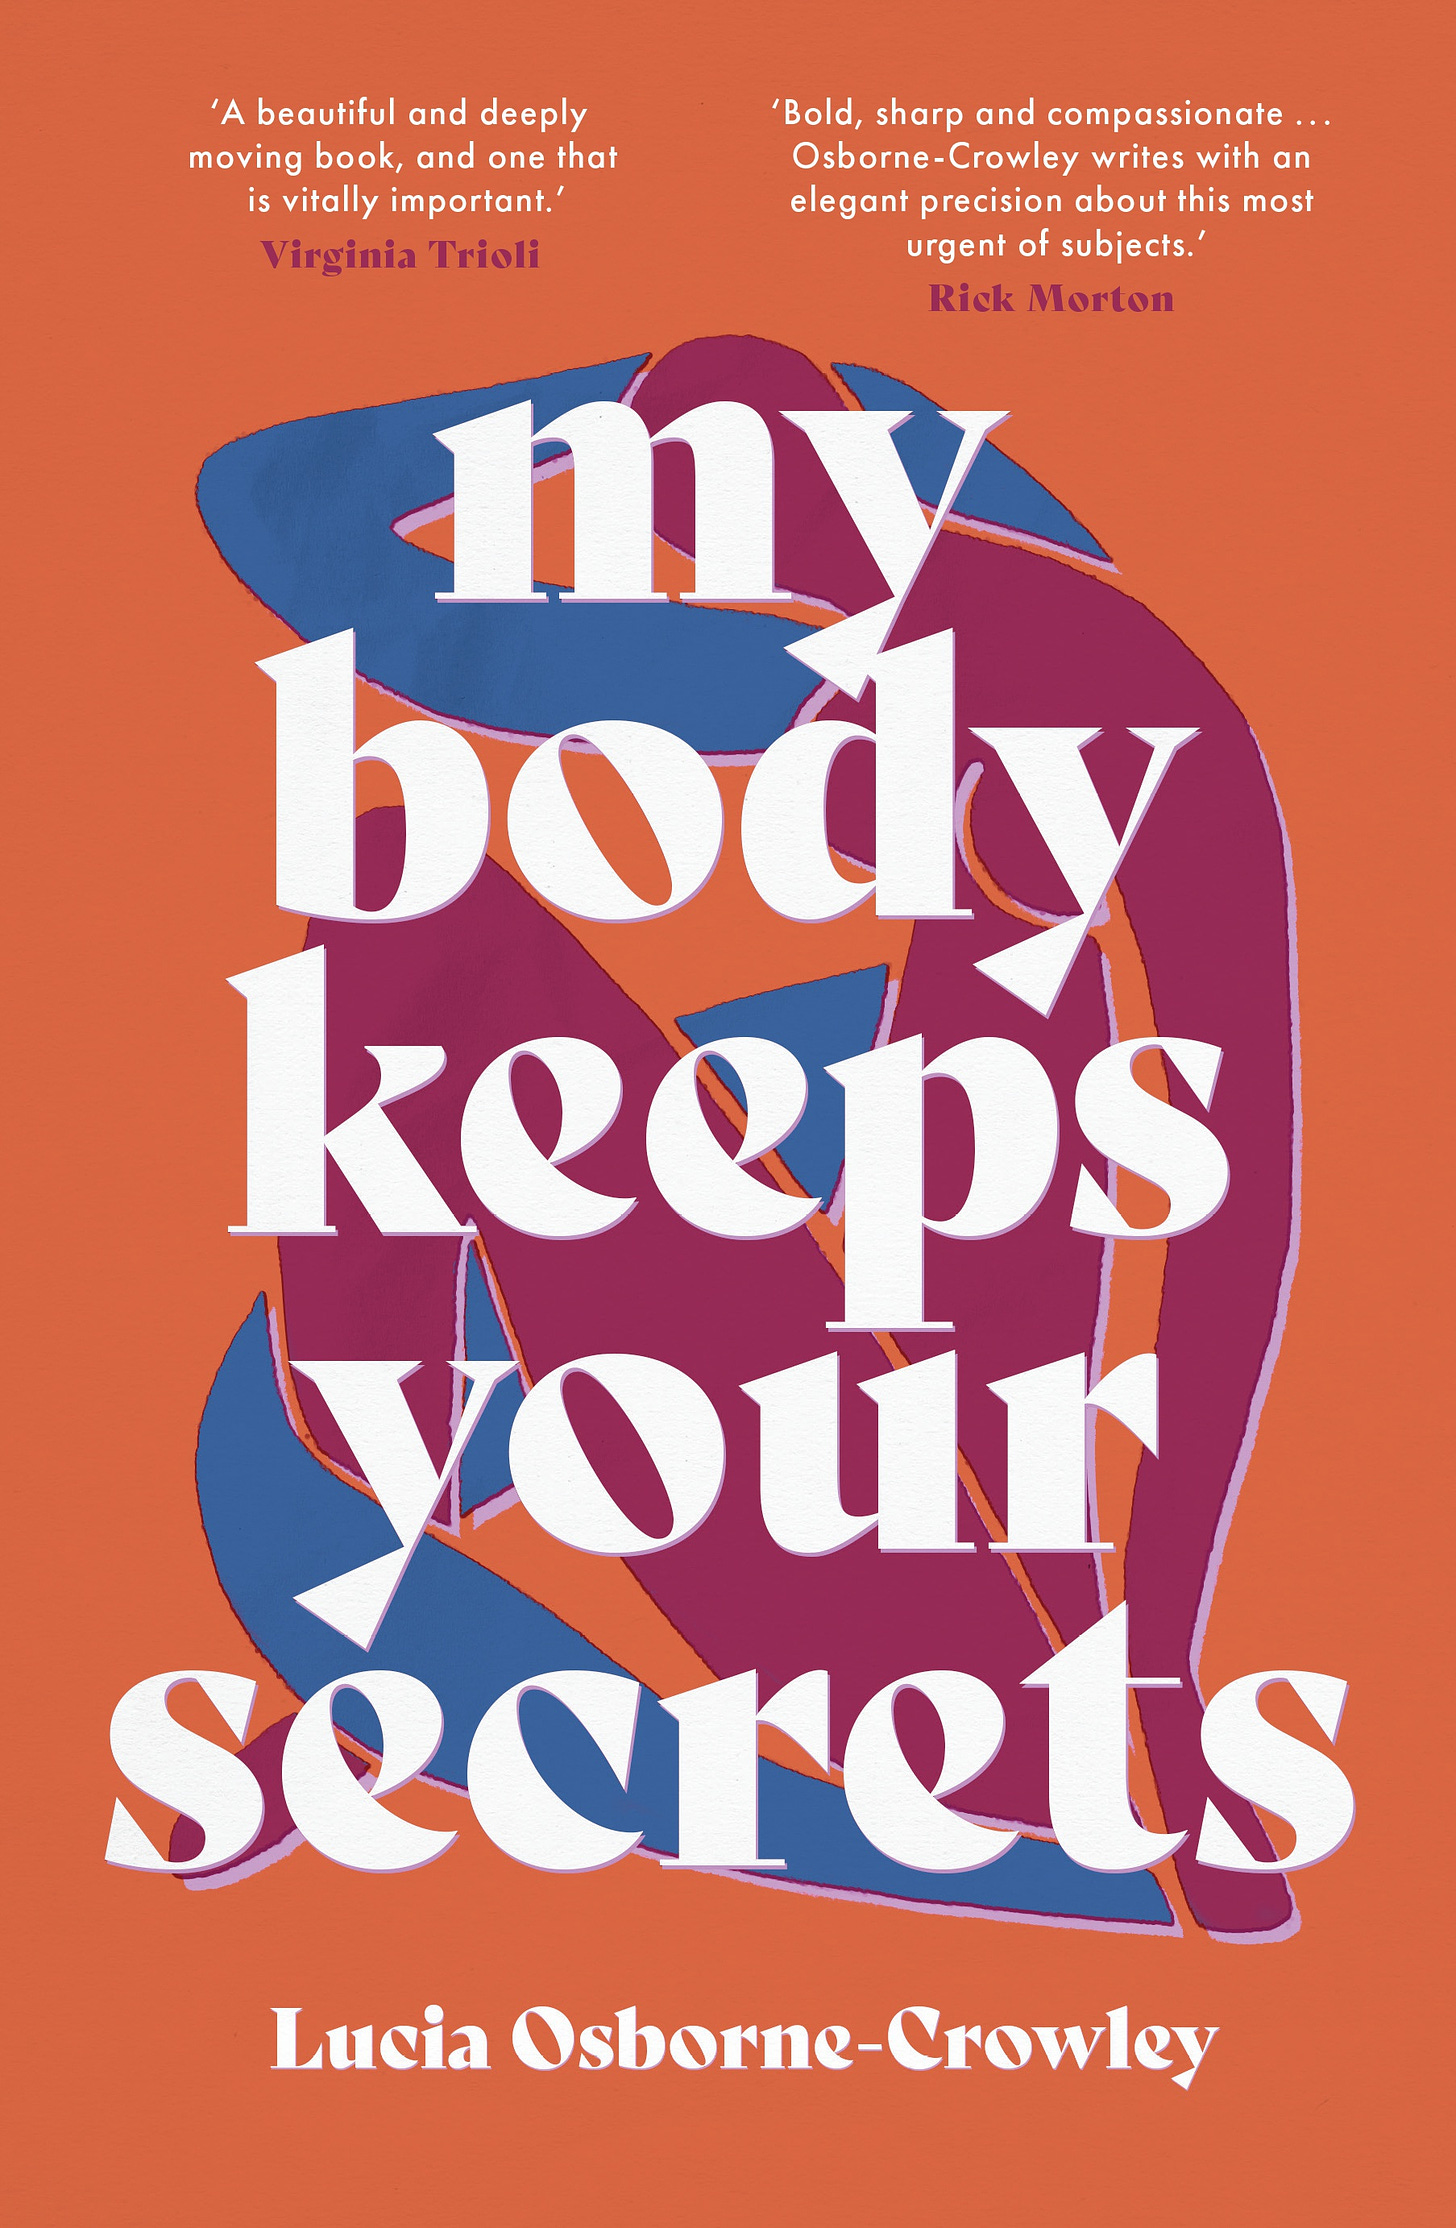 The cover of 'My Body Keeps Your Secrets' by Lucia Osborne-Crowley